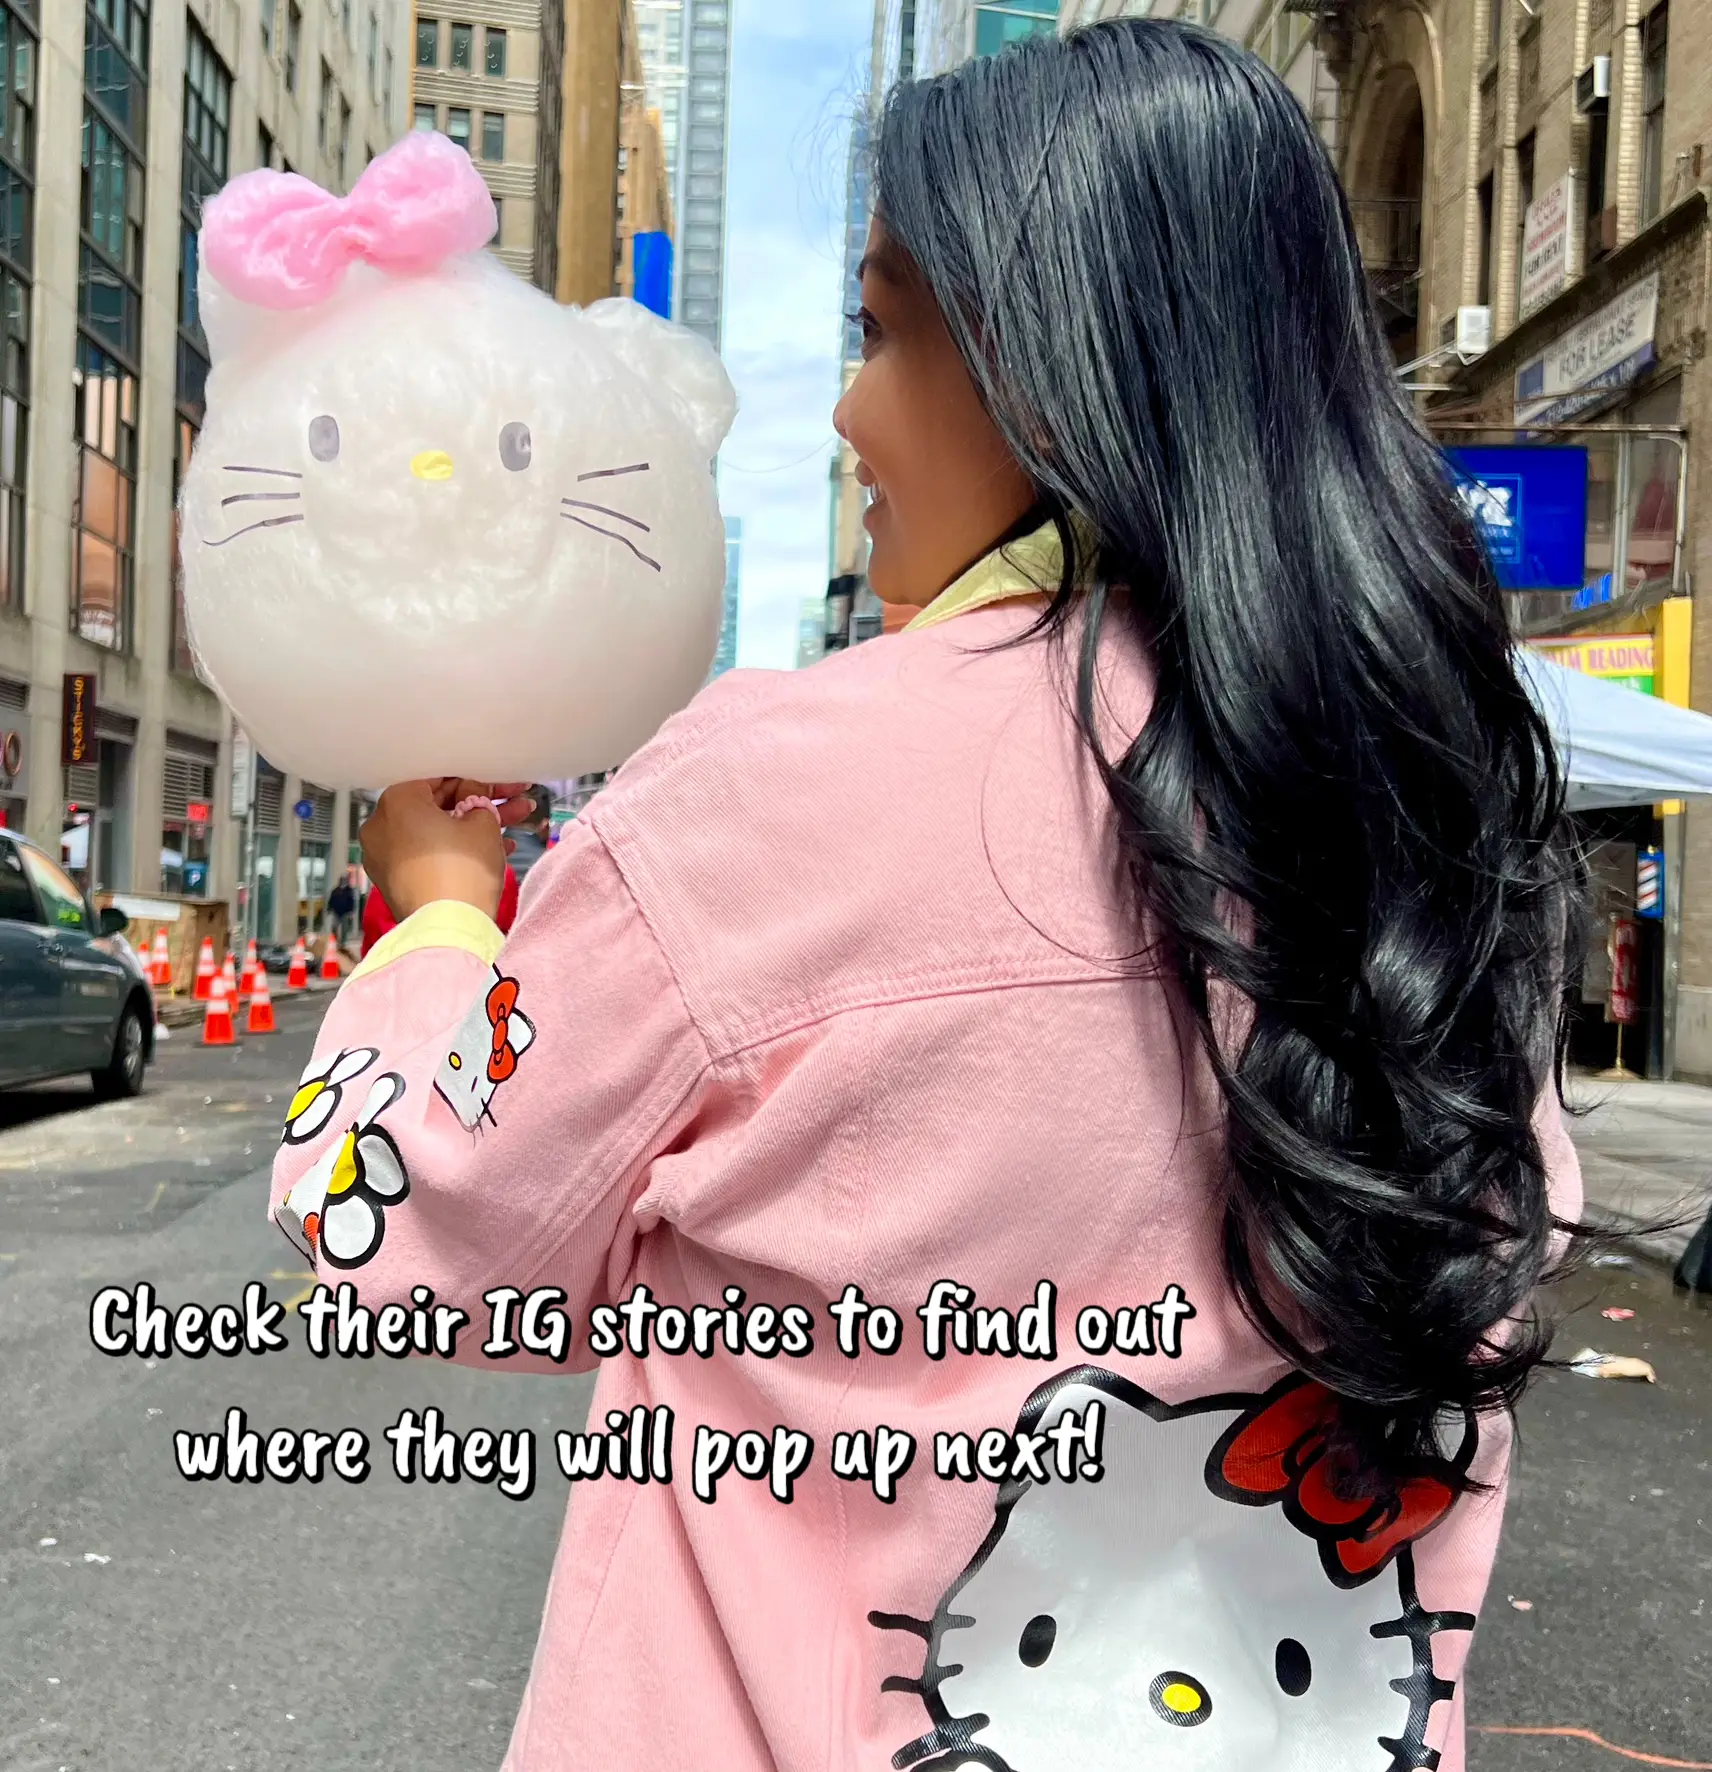  A woman is holding a Hello Kitty phone case.